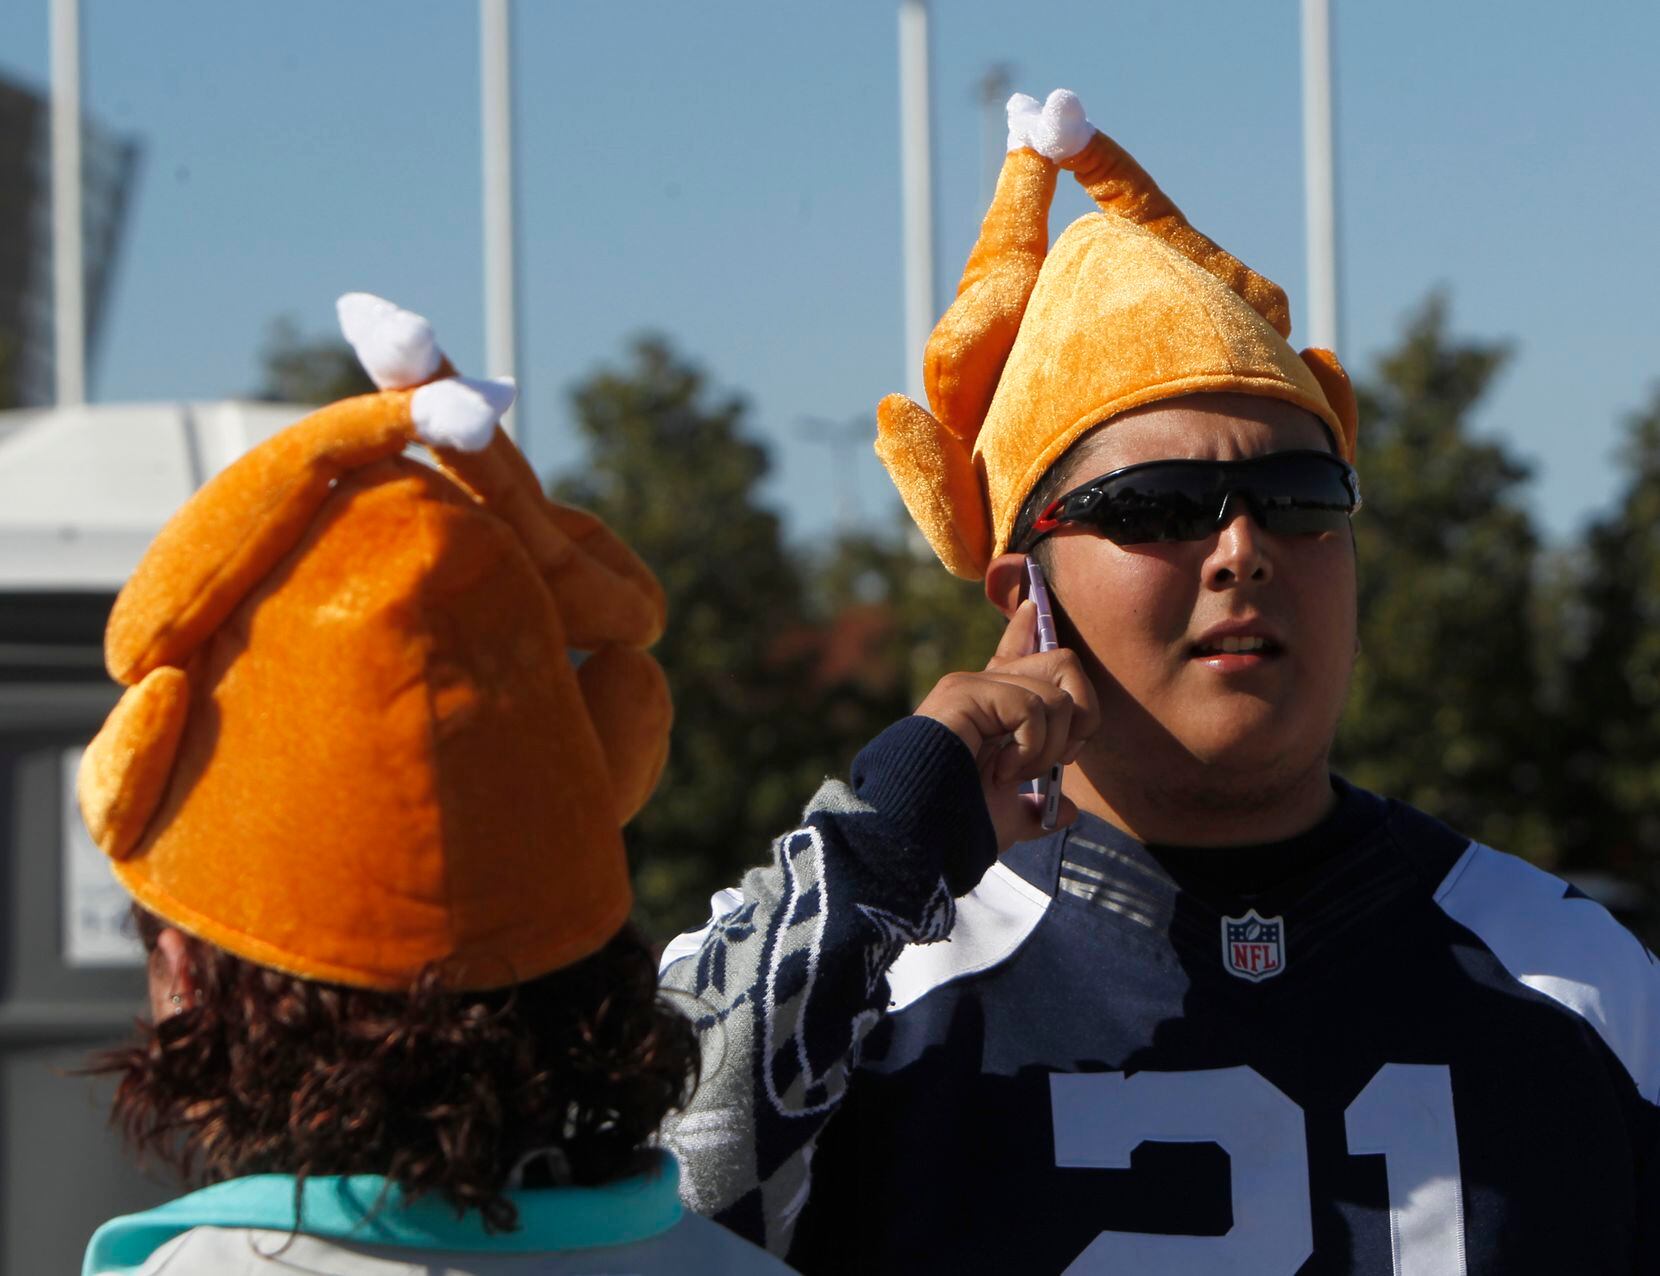 Cowboys fan Joshua Martinez sports a turkey hat as he gives driving directions to a friend looking for the tailgating lot hours before the opening kickoff. The two NFL teams played their Thanksgiving Day game at AT&T Stadium in Arlington on November 25, 2021. (Steve Hamm/ Special Contributor)